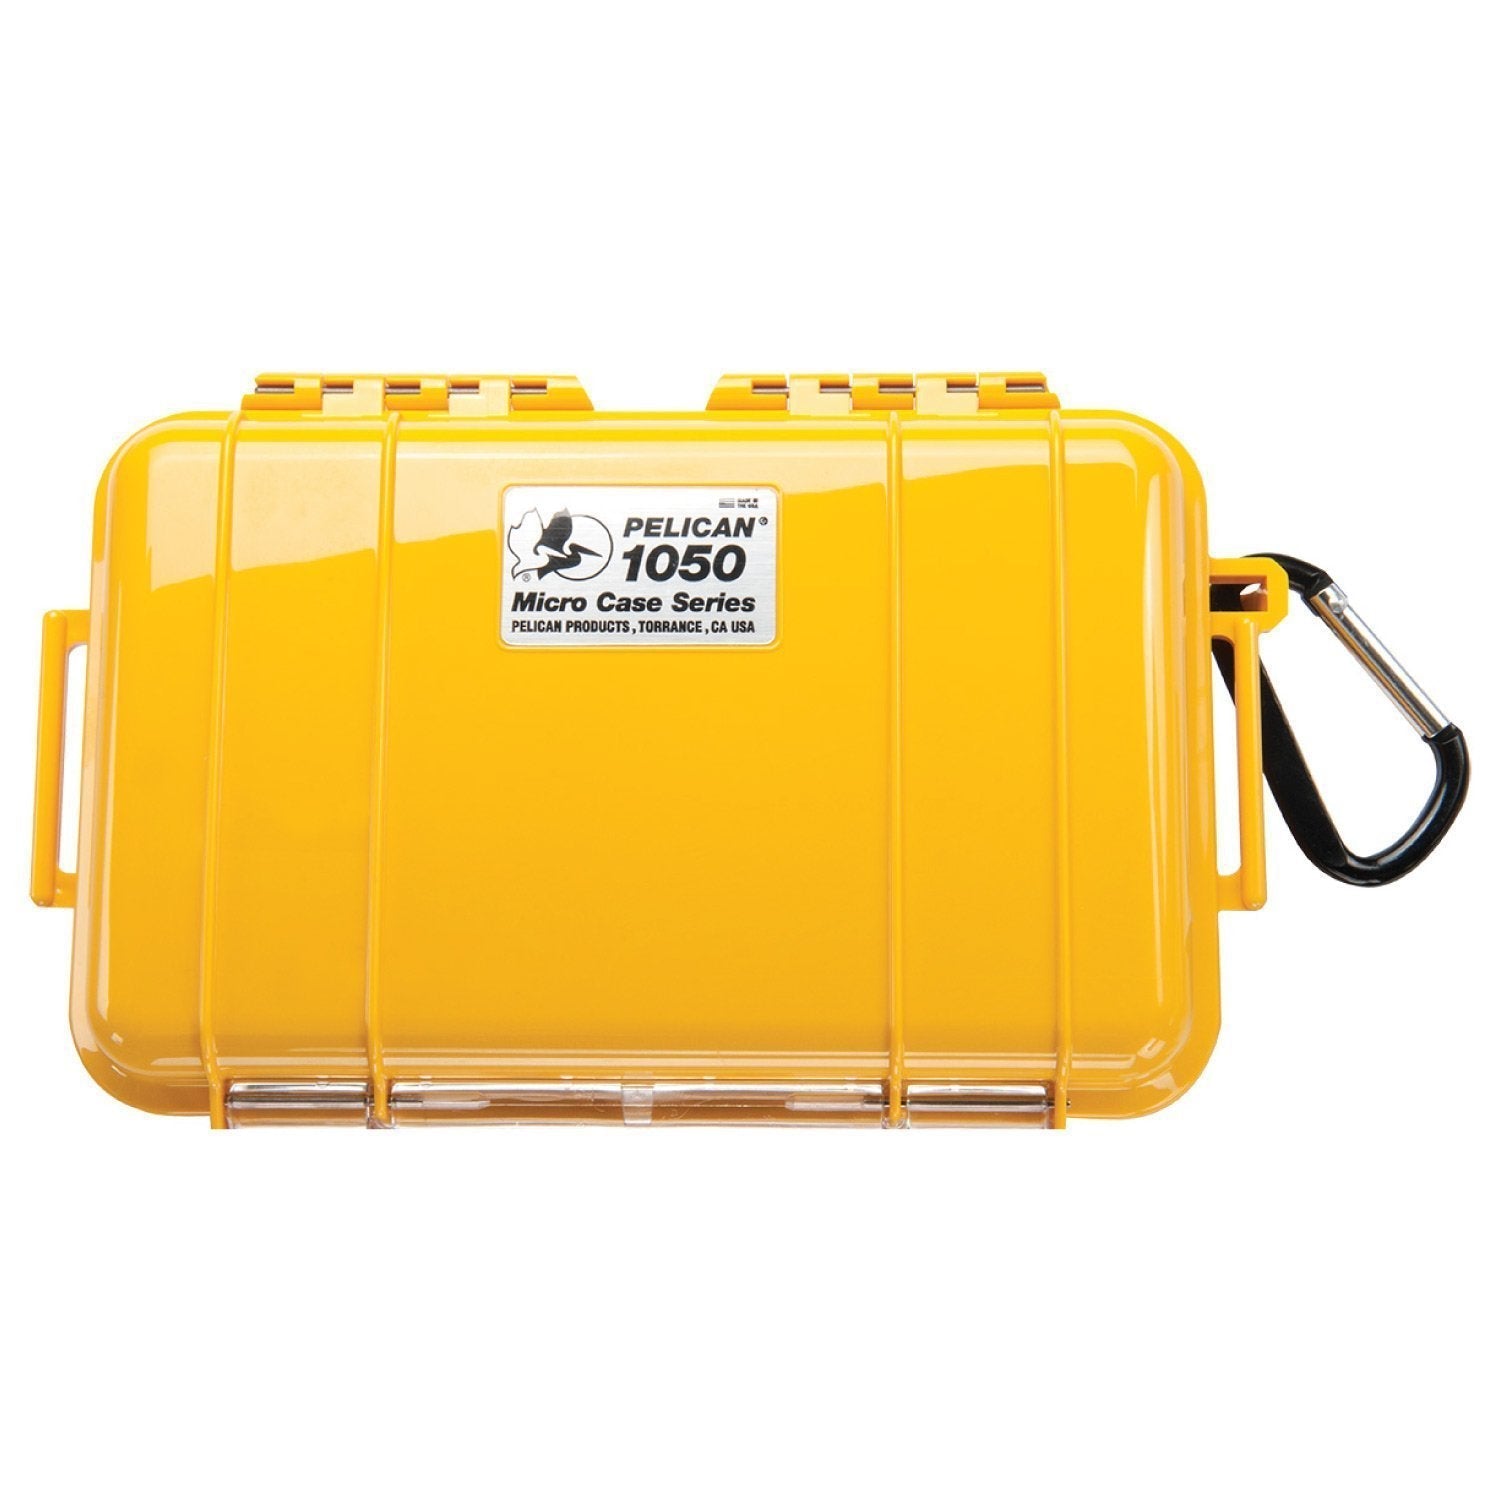 Pelican 1050 Micro Case Cases Pelican Products Yellow Shell with Black Liner Tactical Gear Supplier Tactical Distributors Australia